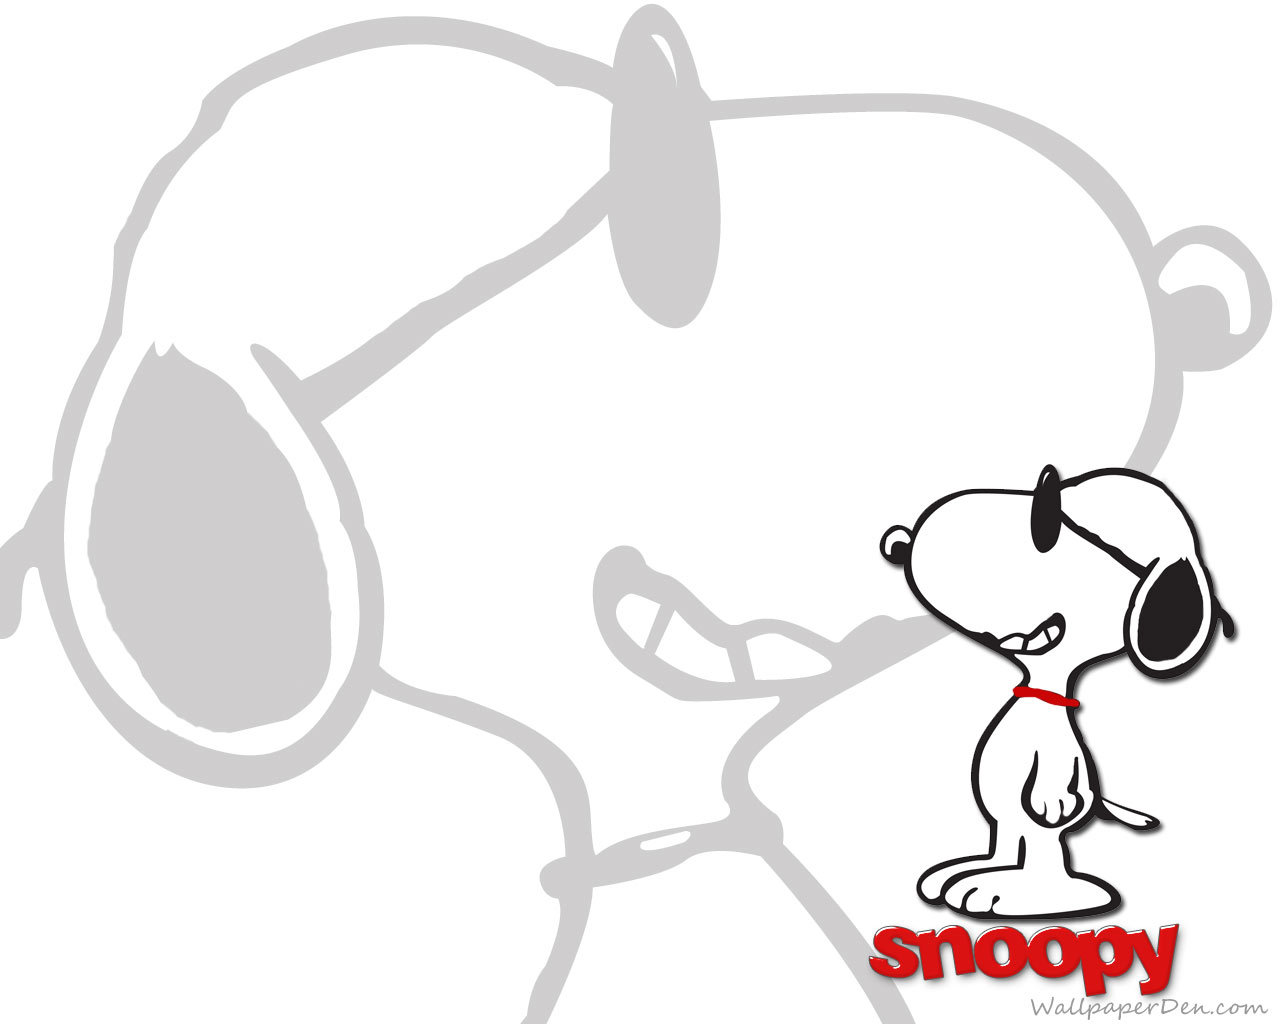 Free Snoopy High Quality Wallpaper Id - Snoopy Wallpapers For Laptop - HD Wallpaper 